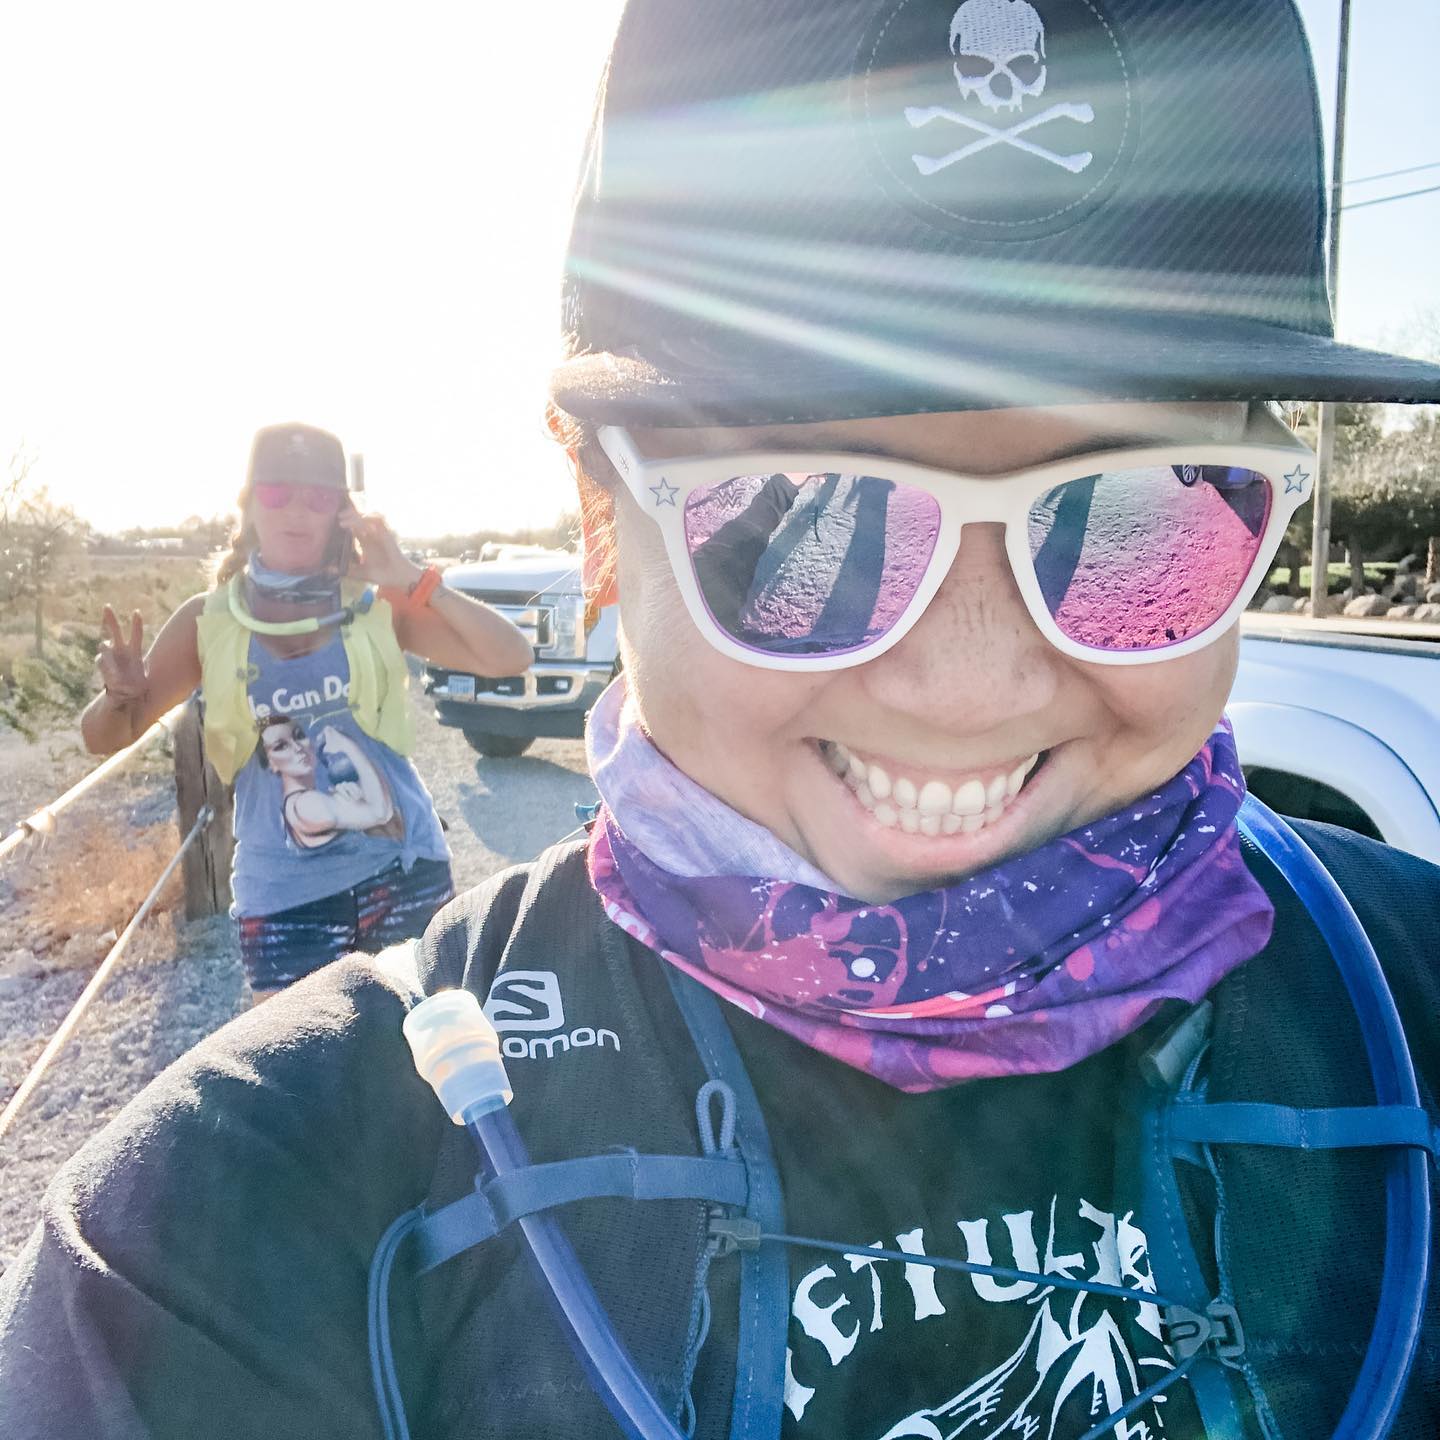 Back in double-digits! Saturday’s long run was warm and I’m not looking forward to the heat next weekend 🥵Also, swipe to see @wining__runner and her very first @kulacloth #trainingrun #baseperformance #michelobultra #teamultra #flofactoryteam #rageon #rivs #risingmountainscoaching [instagram]